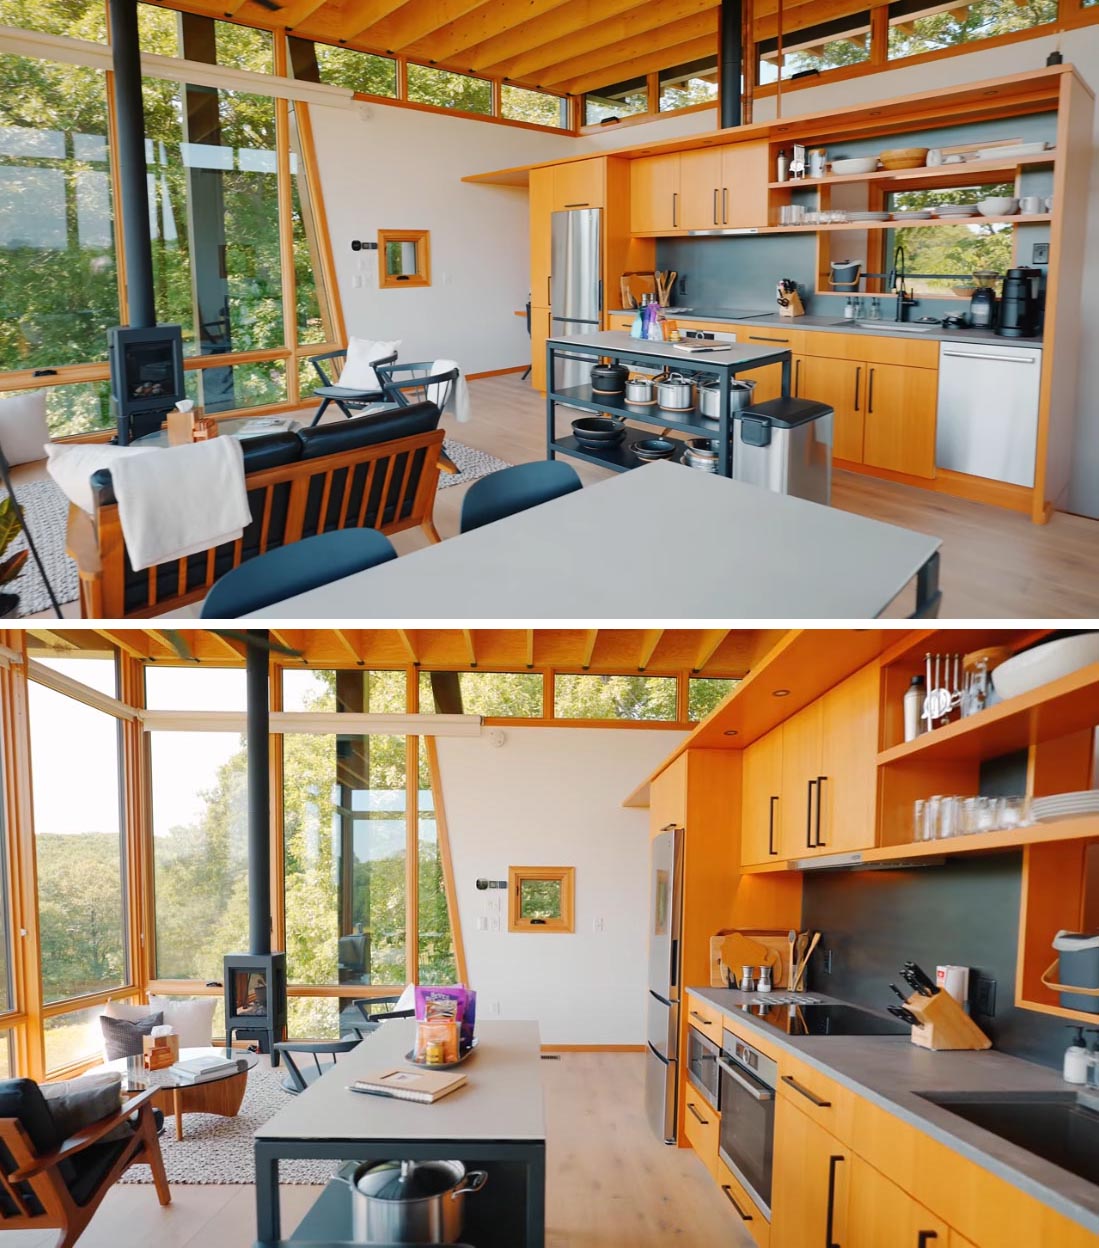 The upper level of this modern cabin is home to an open plan glass-walled living room, dining area, and small kitchen.